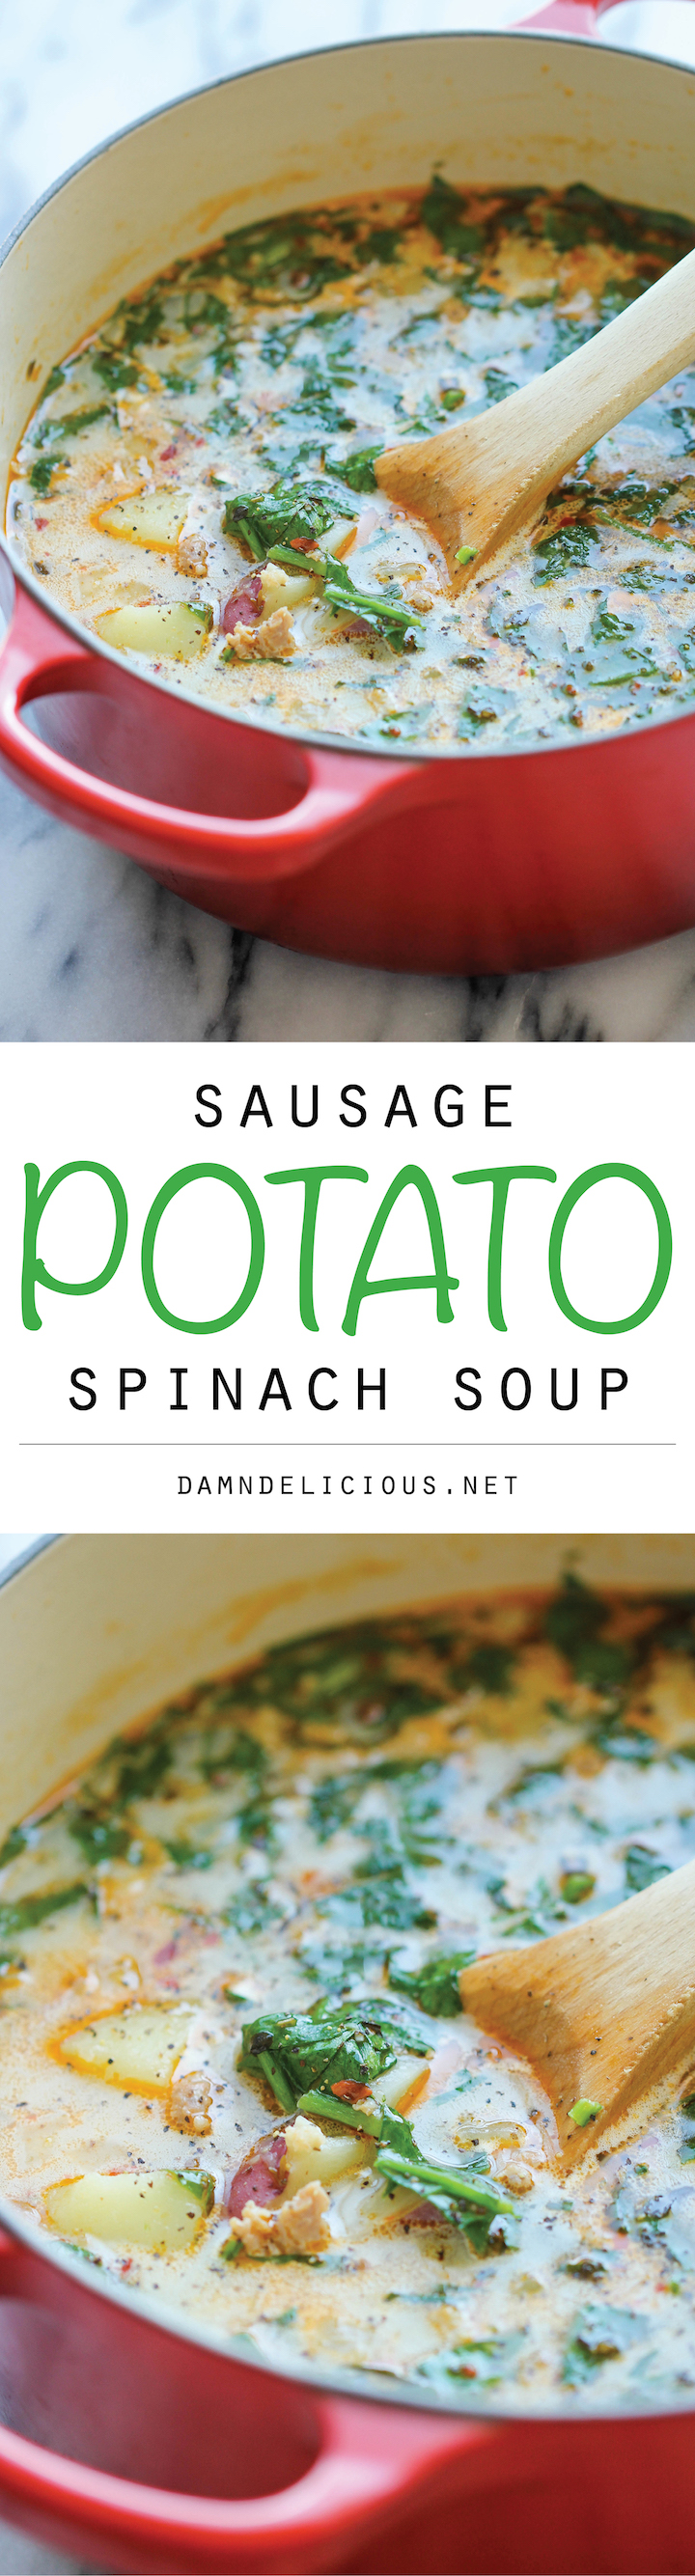 Sausage, Potato and Spinach Soup - A hearty, comforting soup that's so easy and simple to make, loaded with tons of fiber and flavor! 329.5 calories.